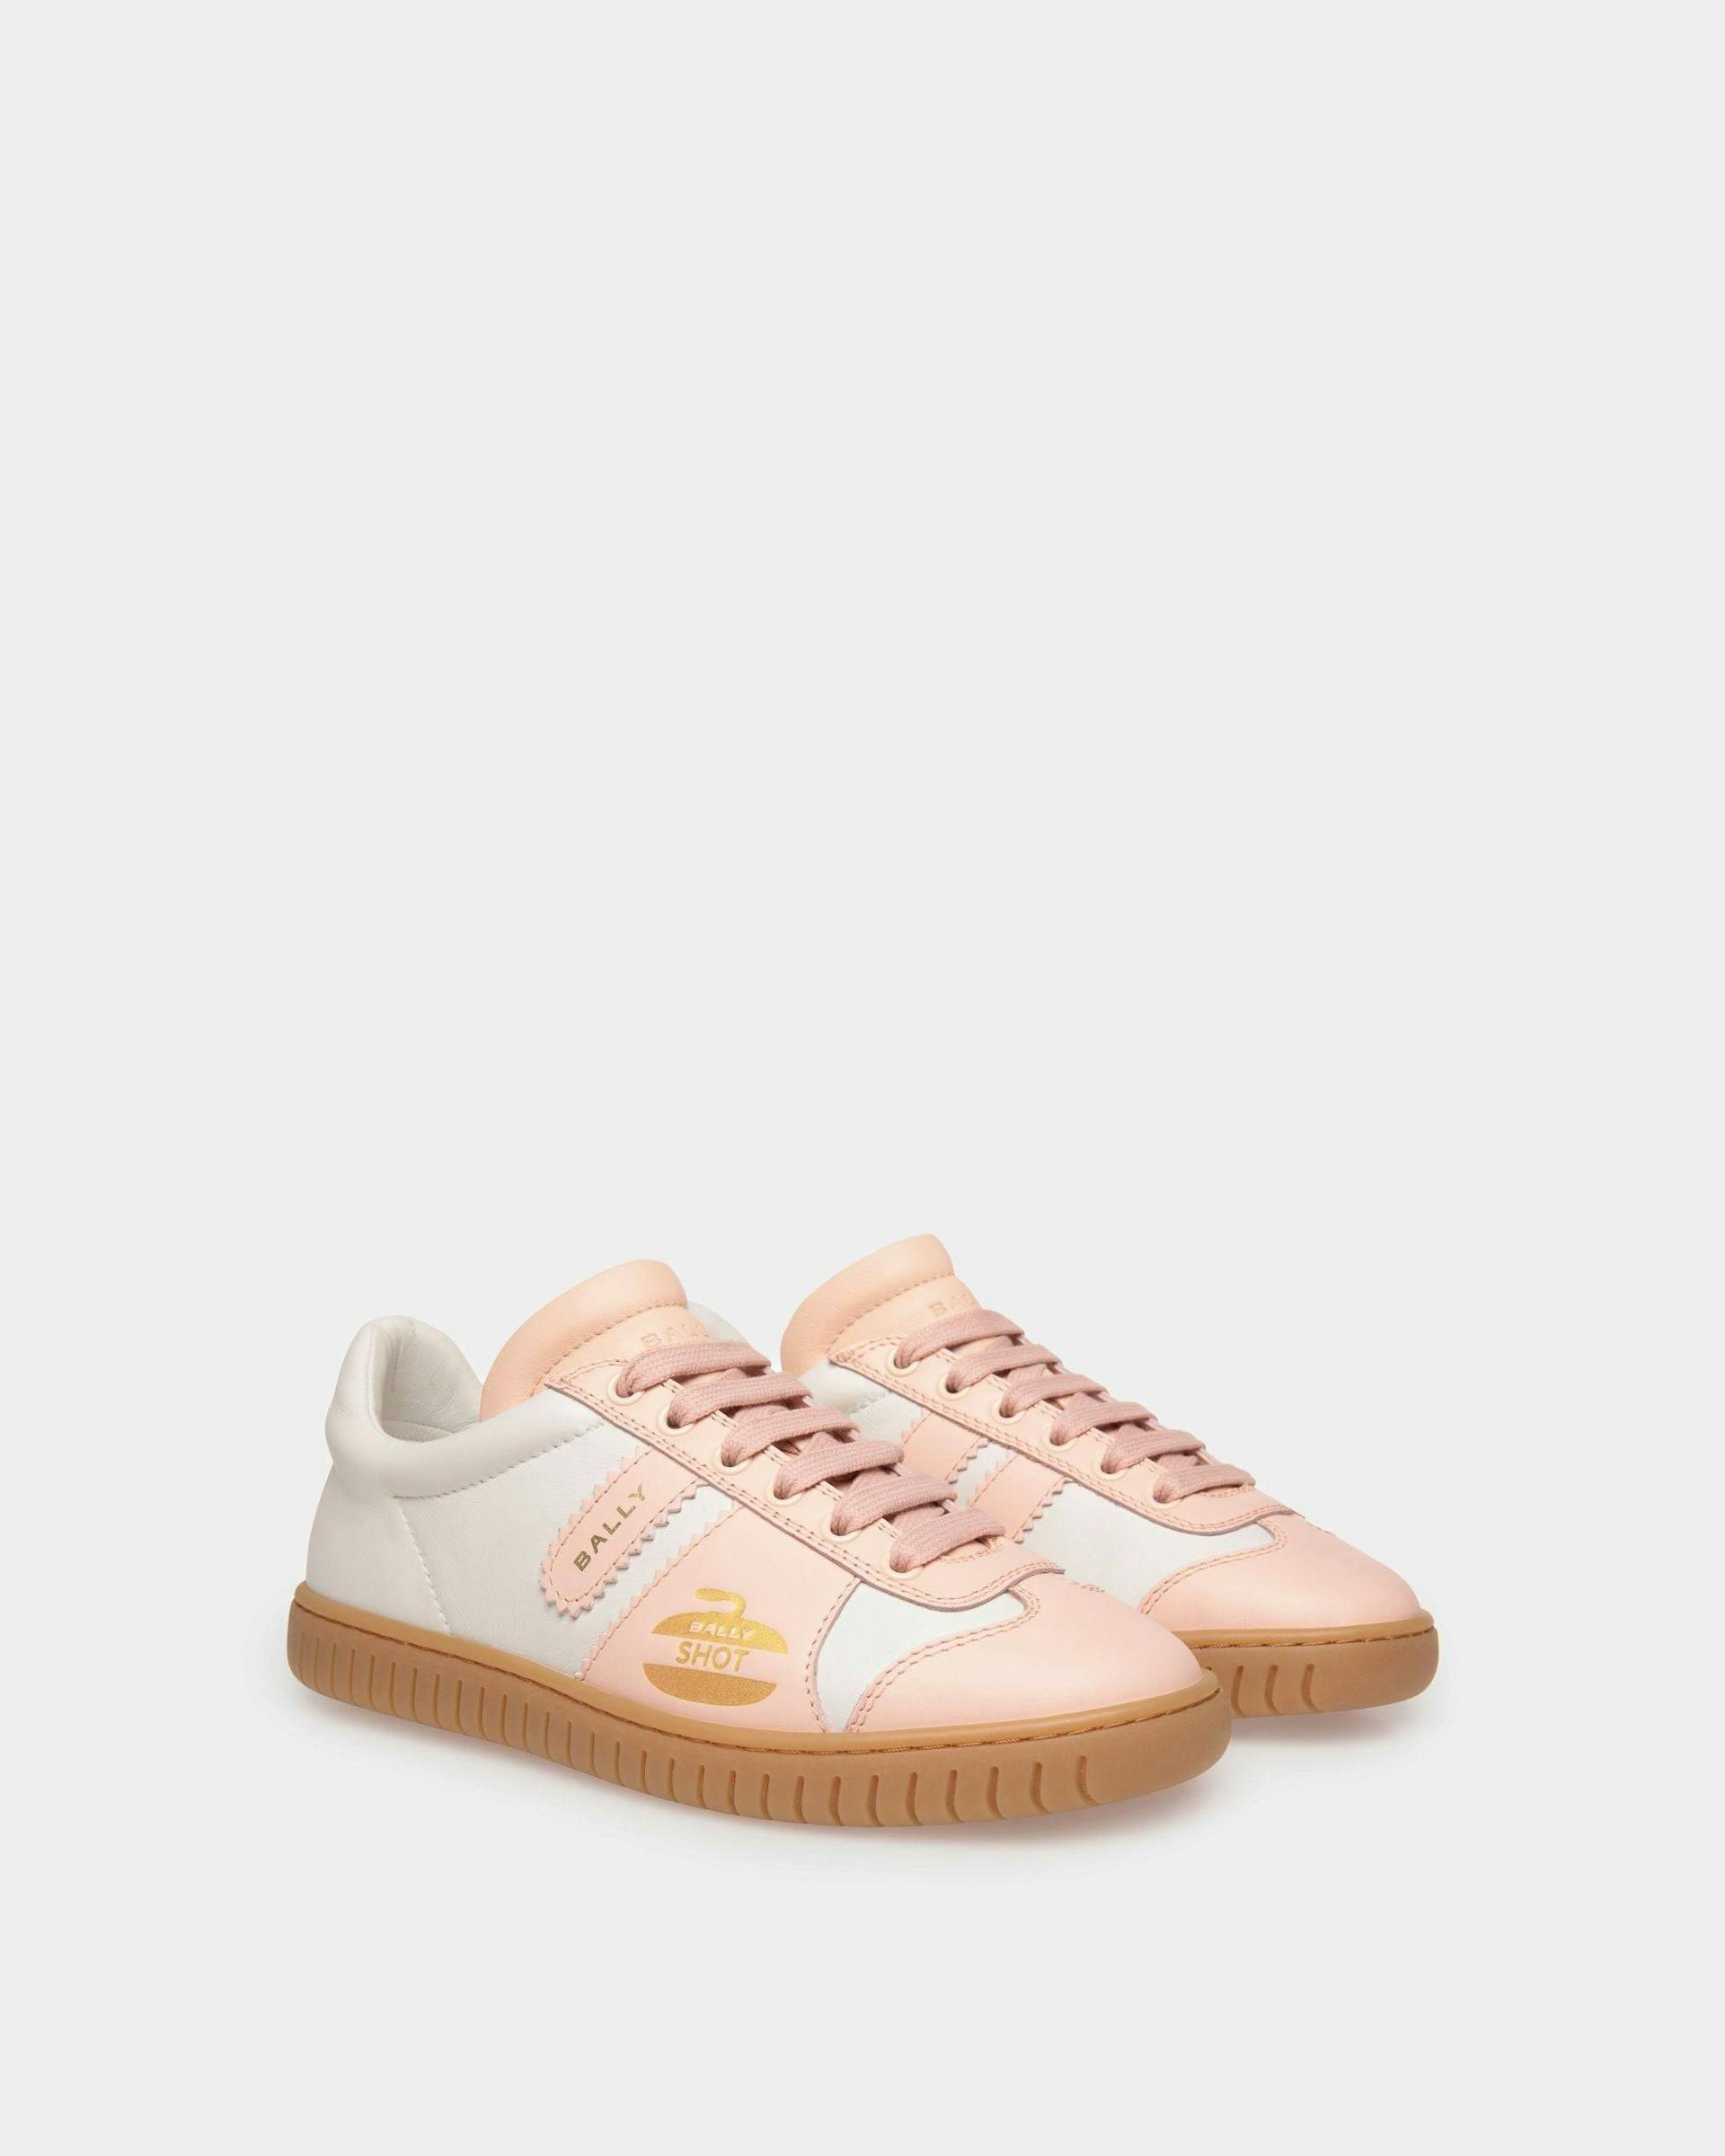 Women's Player Sneaker in White and Baby Pink Leather | Bally | Still Life 3/4 Front